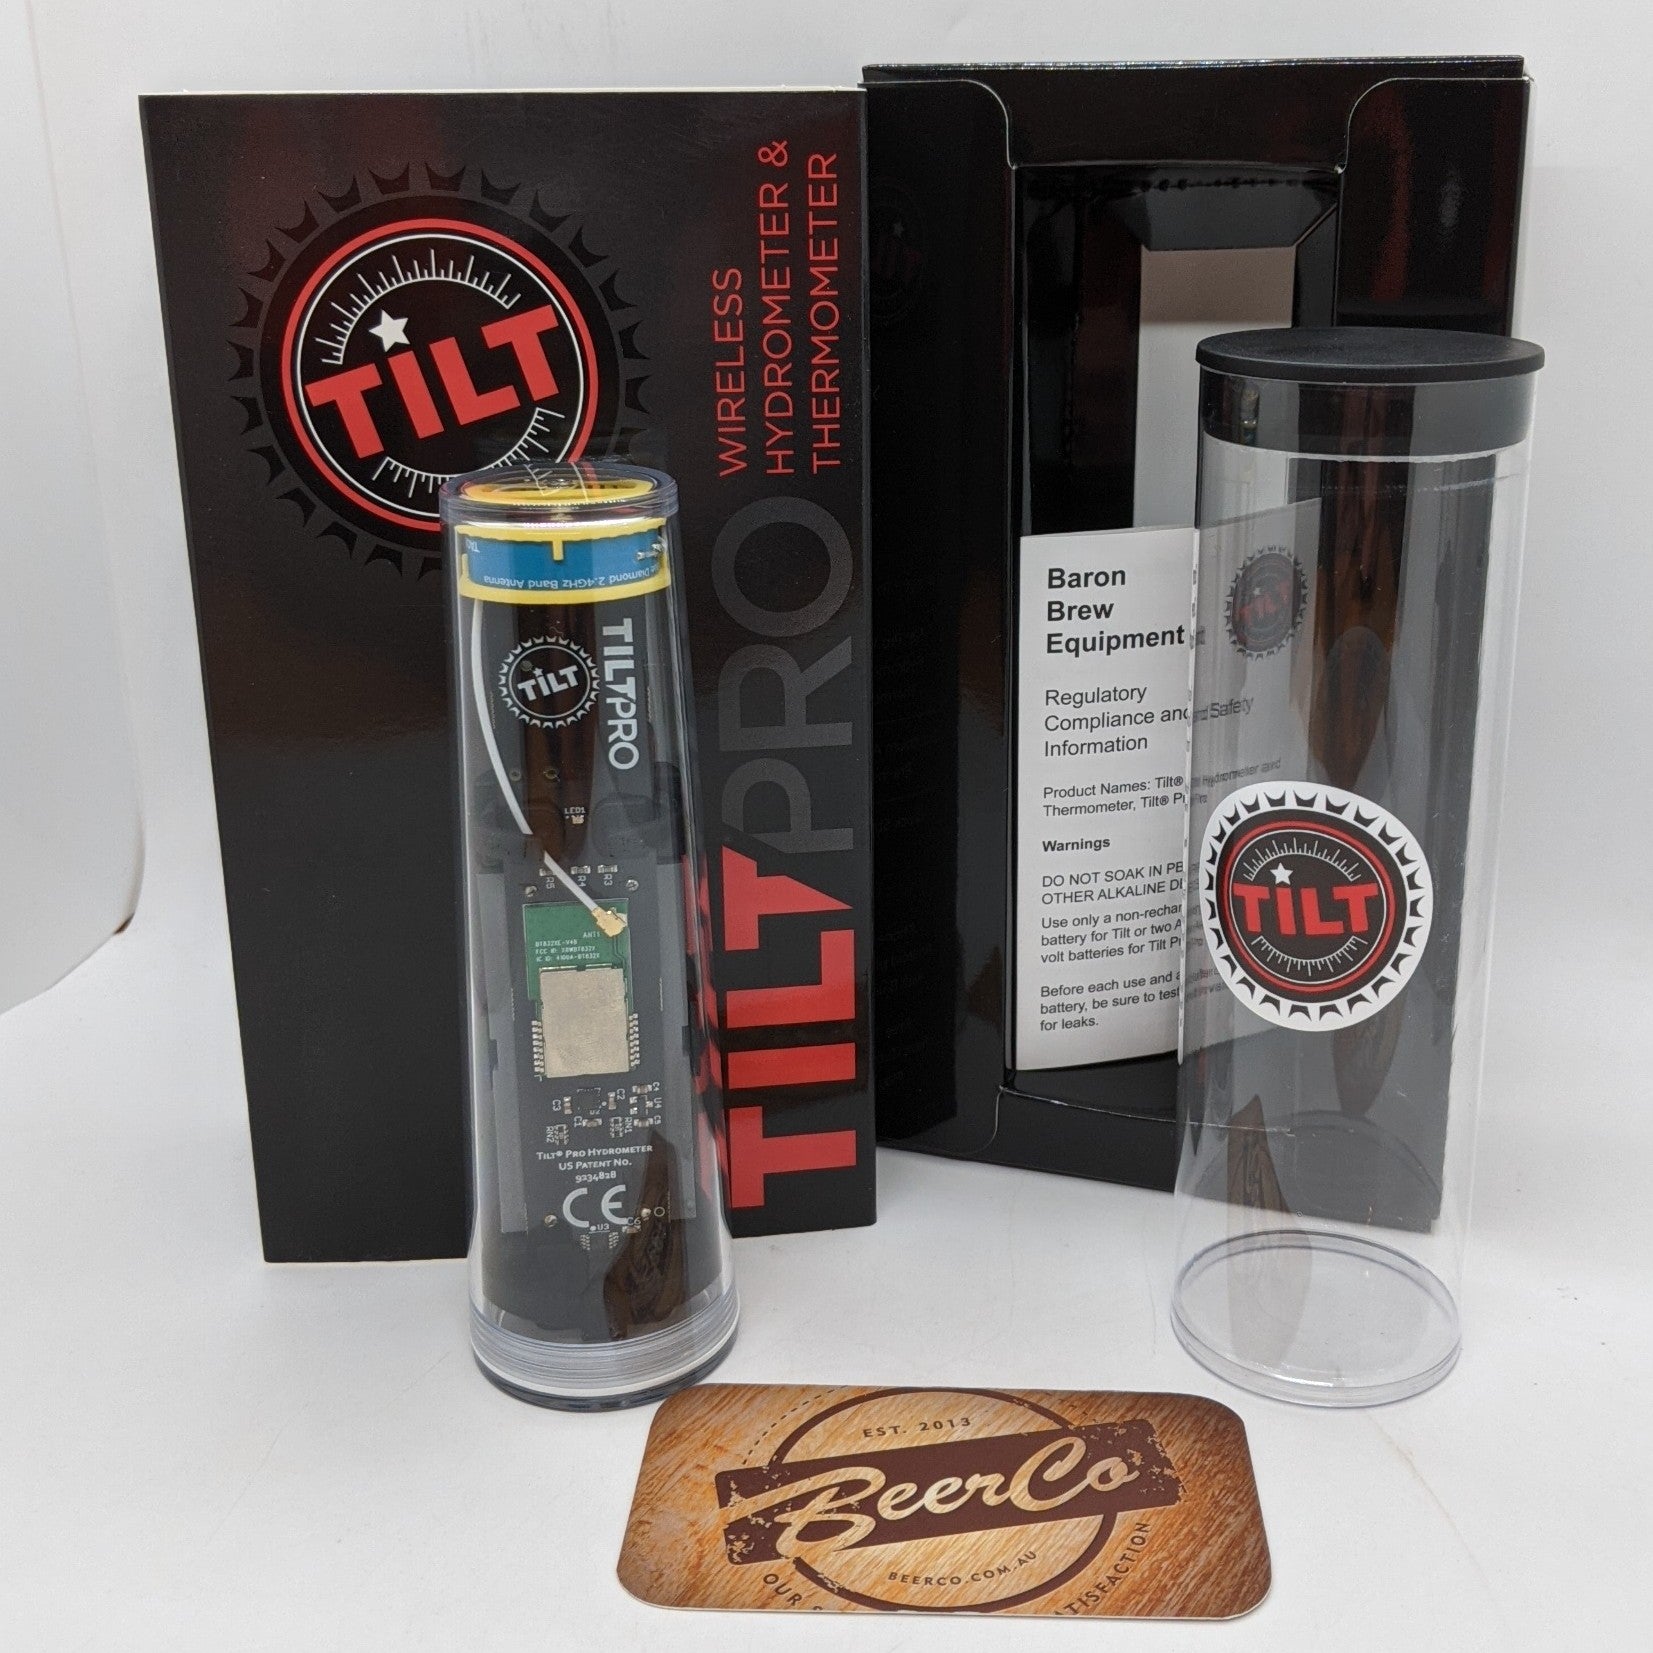 TILT® PRO Wireless Hydrometer and Thermometer - 0